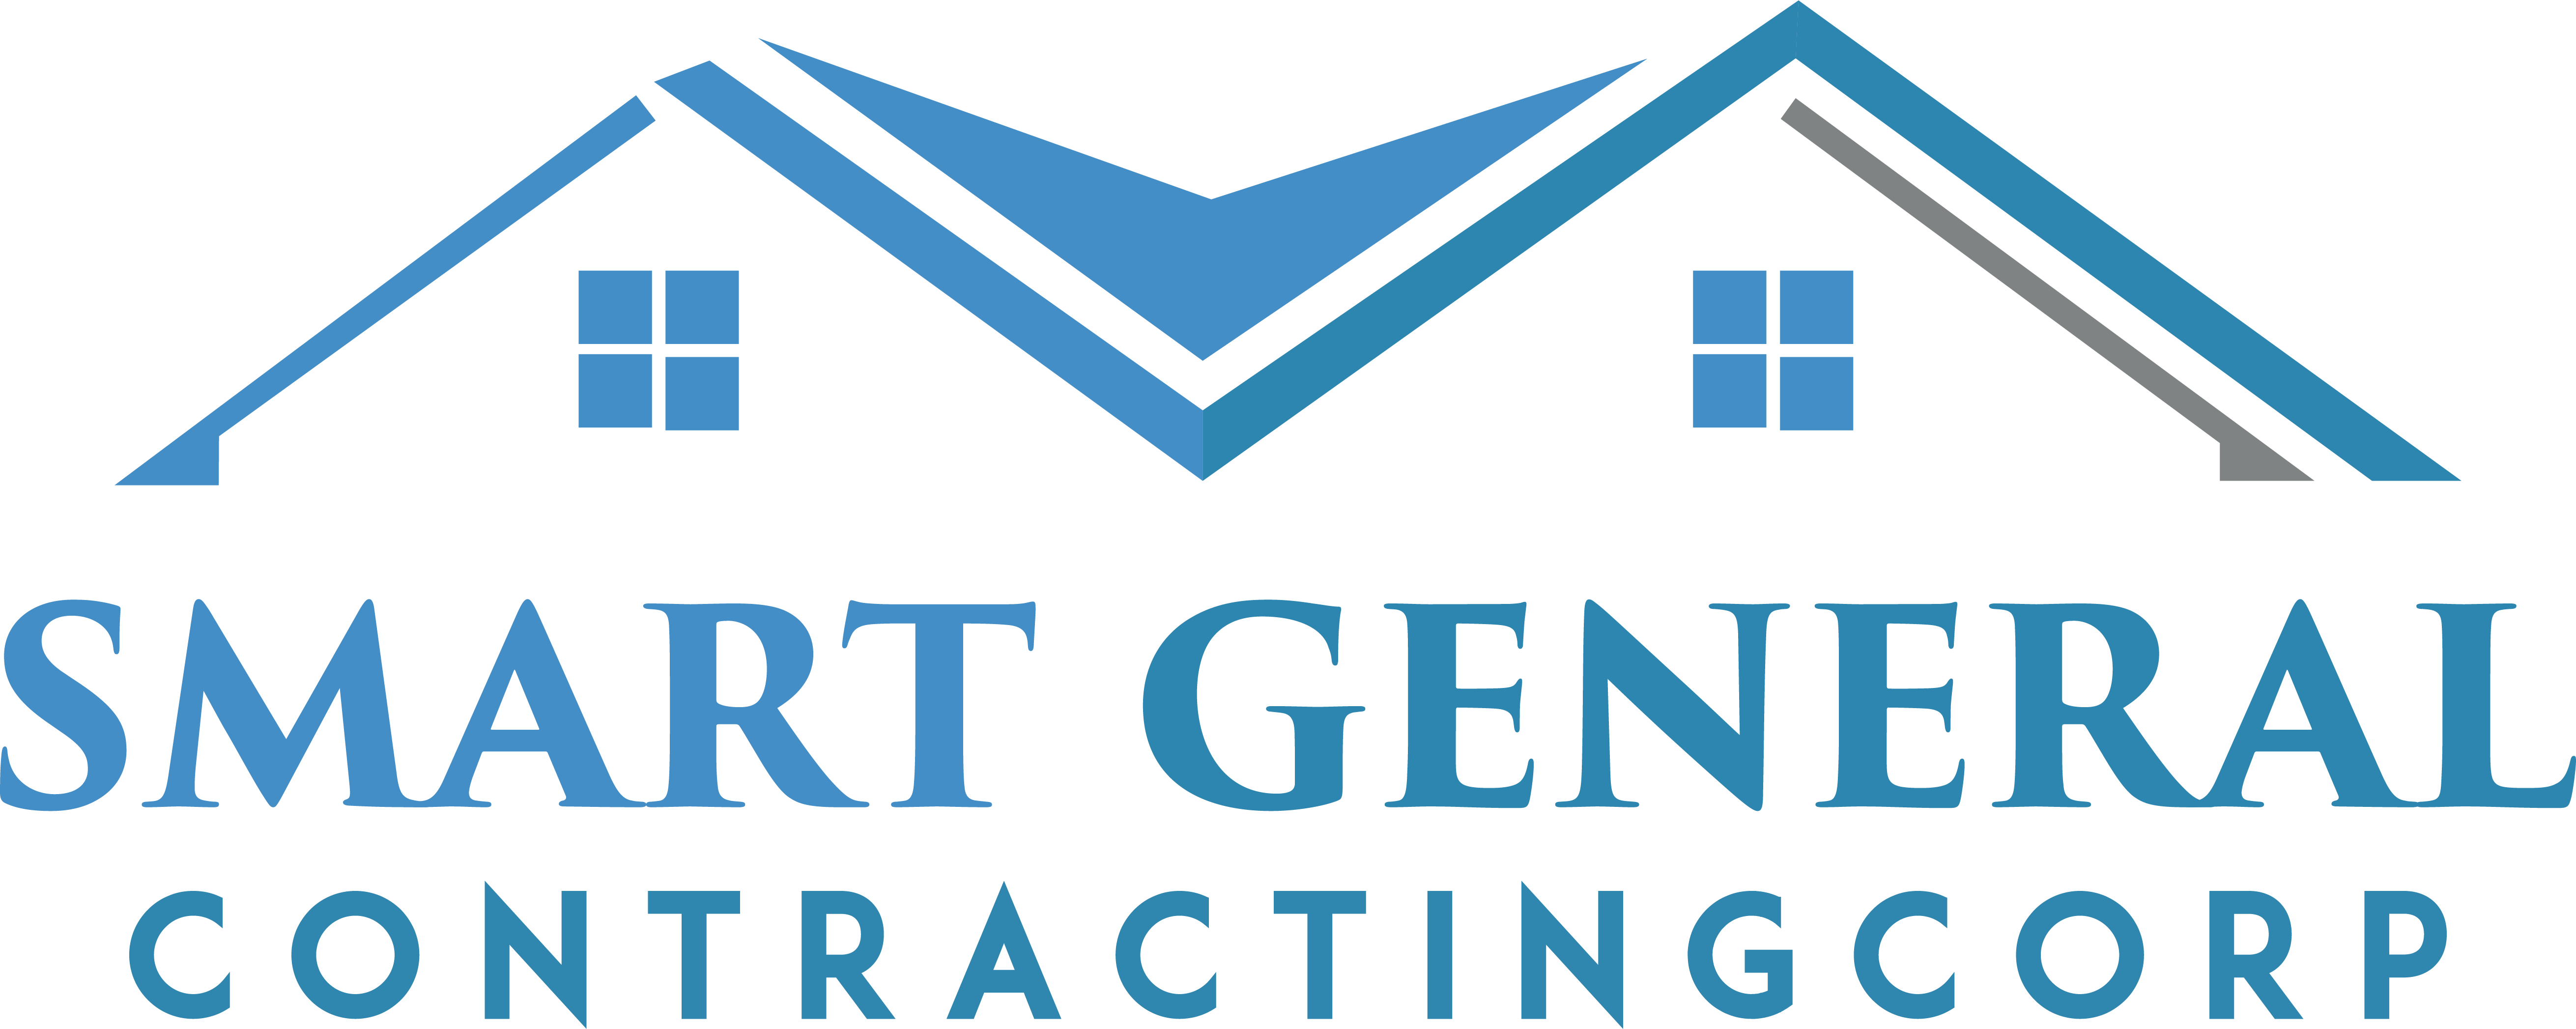 SMART GENERAL CONTRACTING CORP. logo